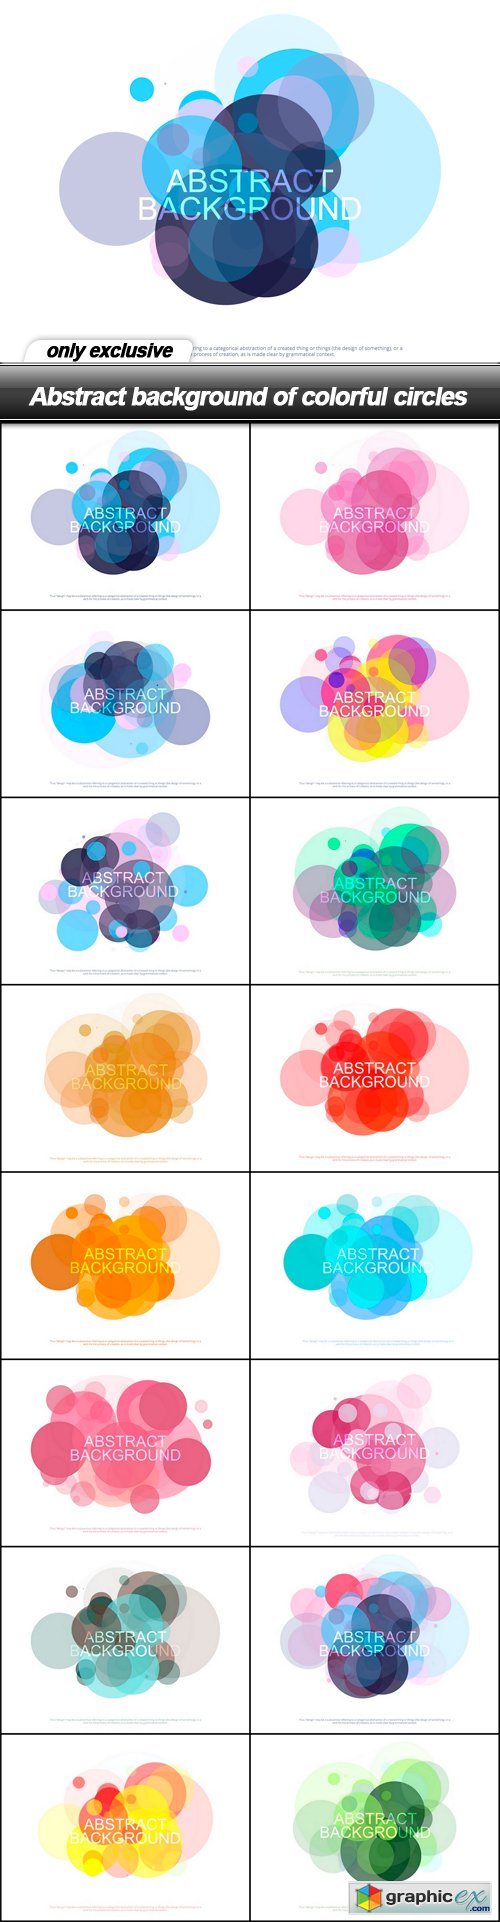 Abstract background of colorful circles - 16 EPS